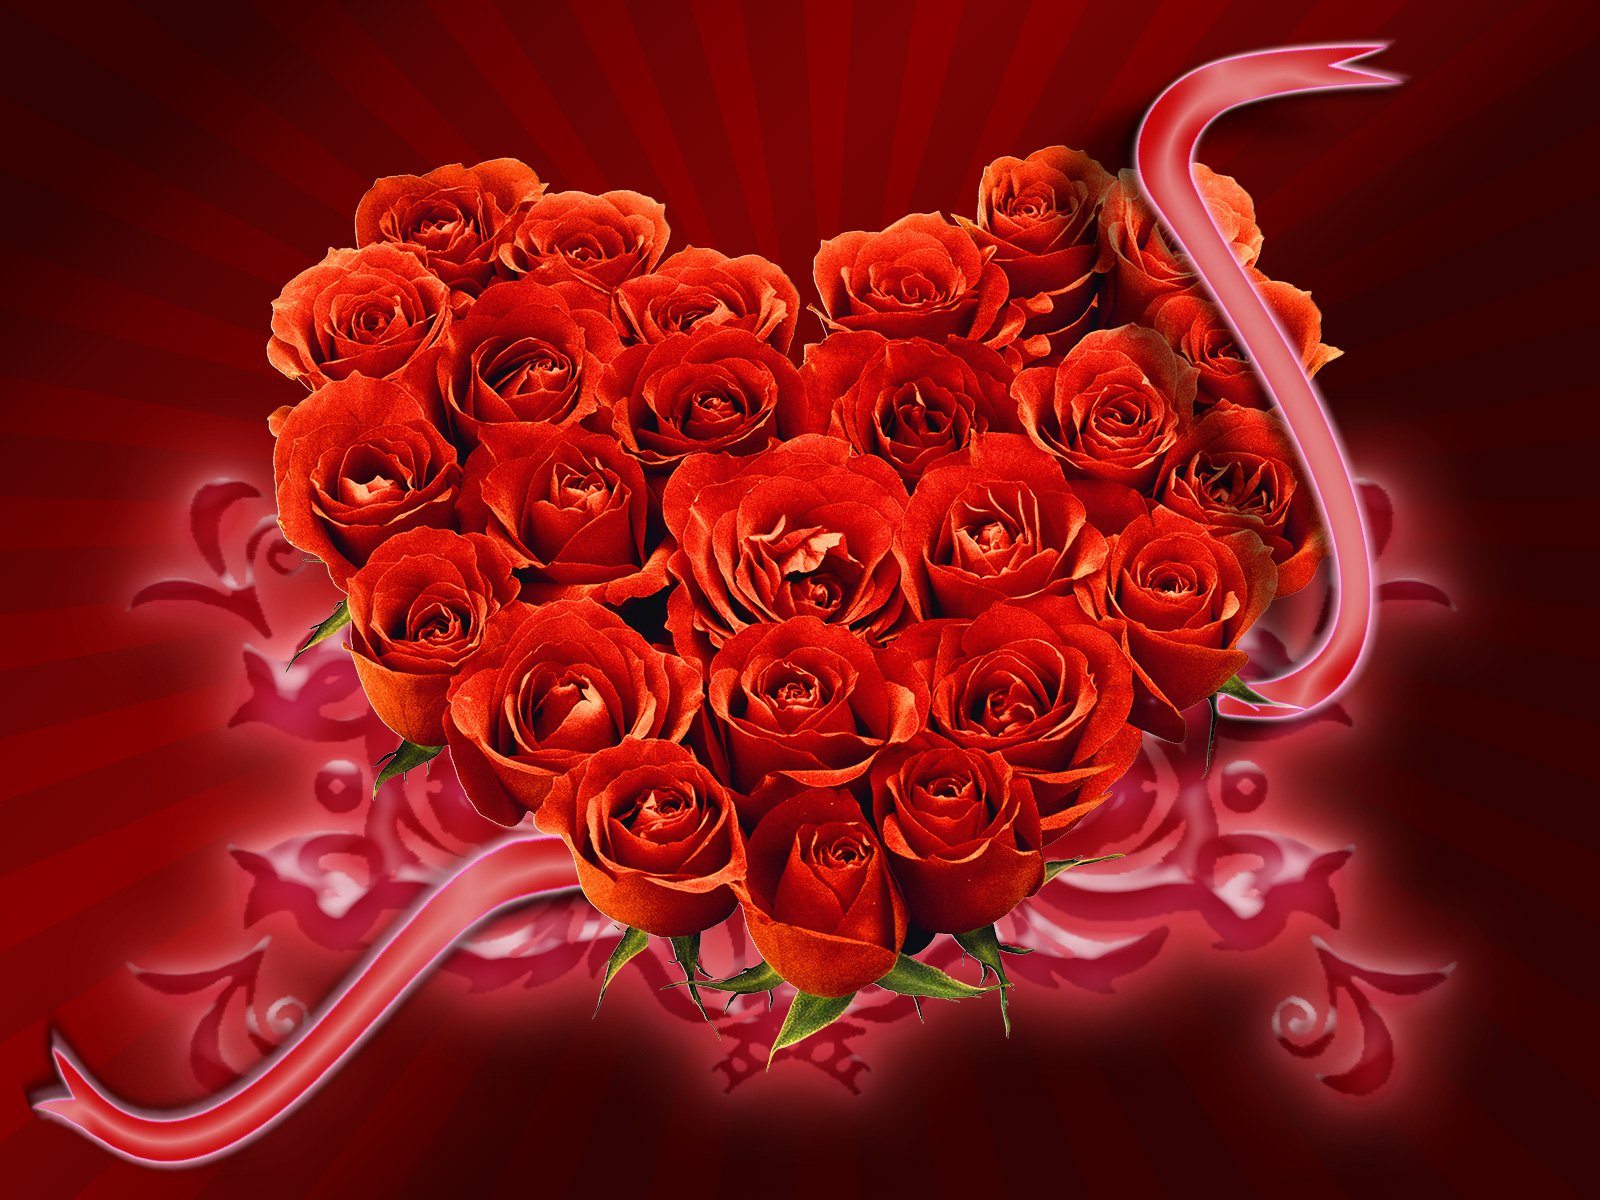 Many Red Roses, Heart From Roses, Download Photo, Desktop - Hearts And Roses - HD Wallpaper 